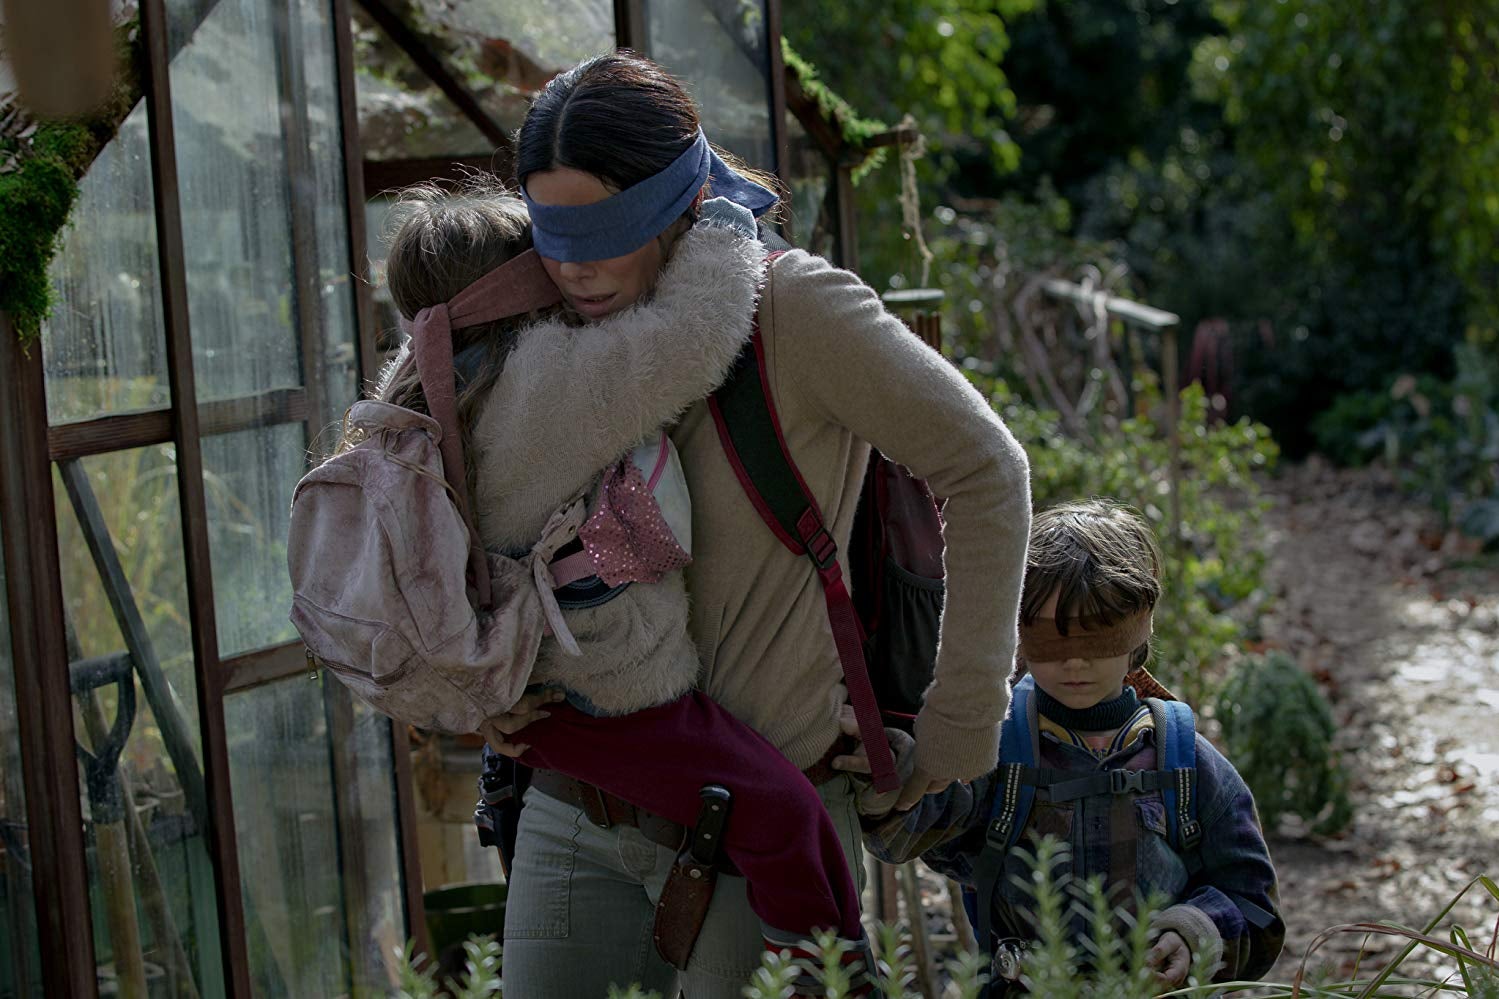 A woman carries a small girl through the forest as a young boy walks alongside them. They are all blindfolded. 